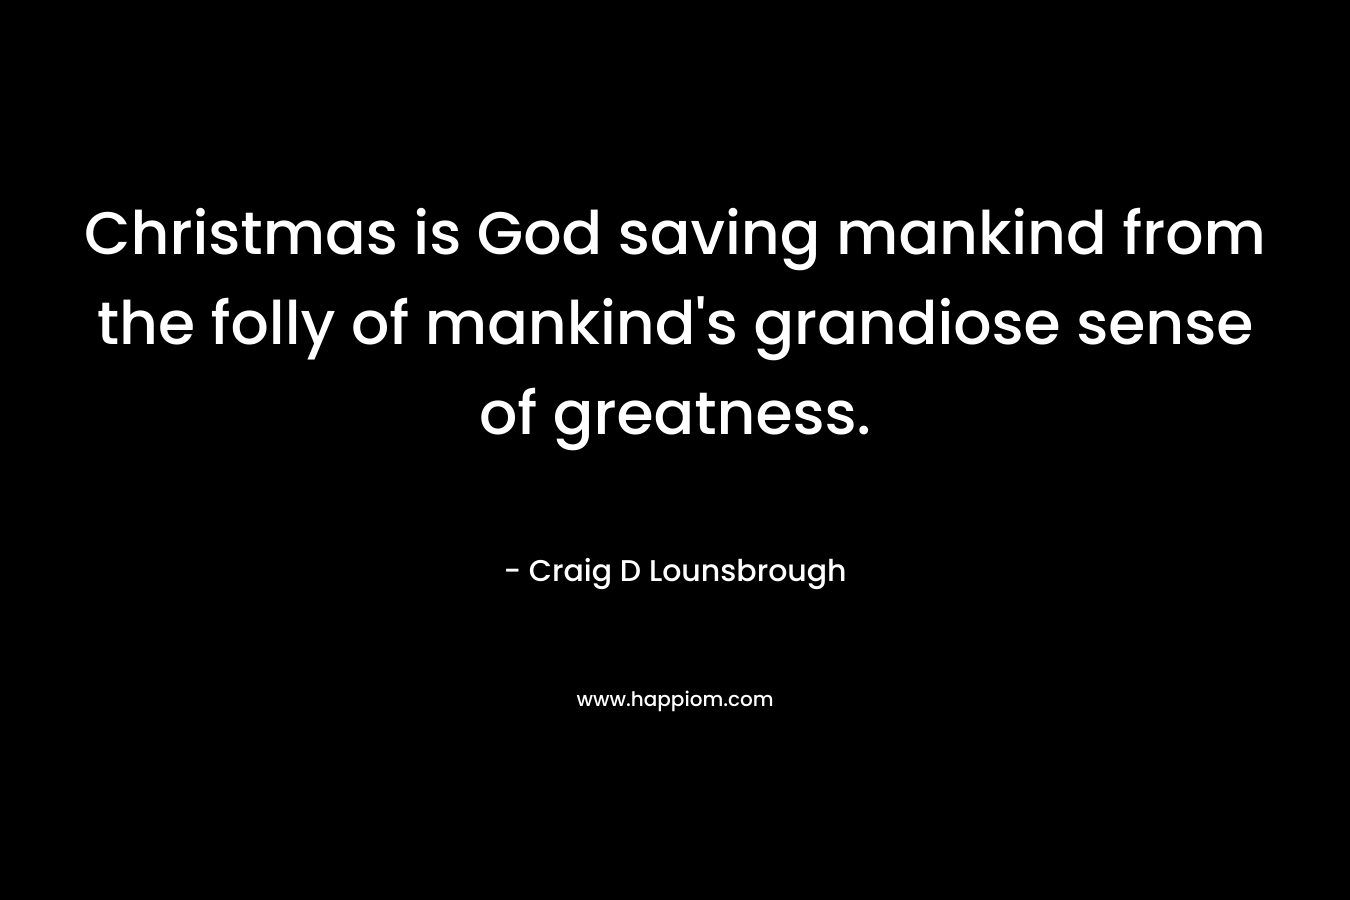 Christmas is God saving mankind from the folly of mankind’s grandiose sense of greatness. – Craig D Lounsbrough